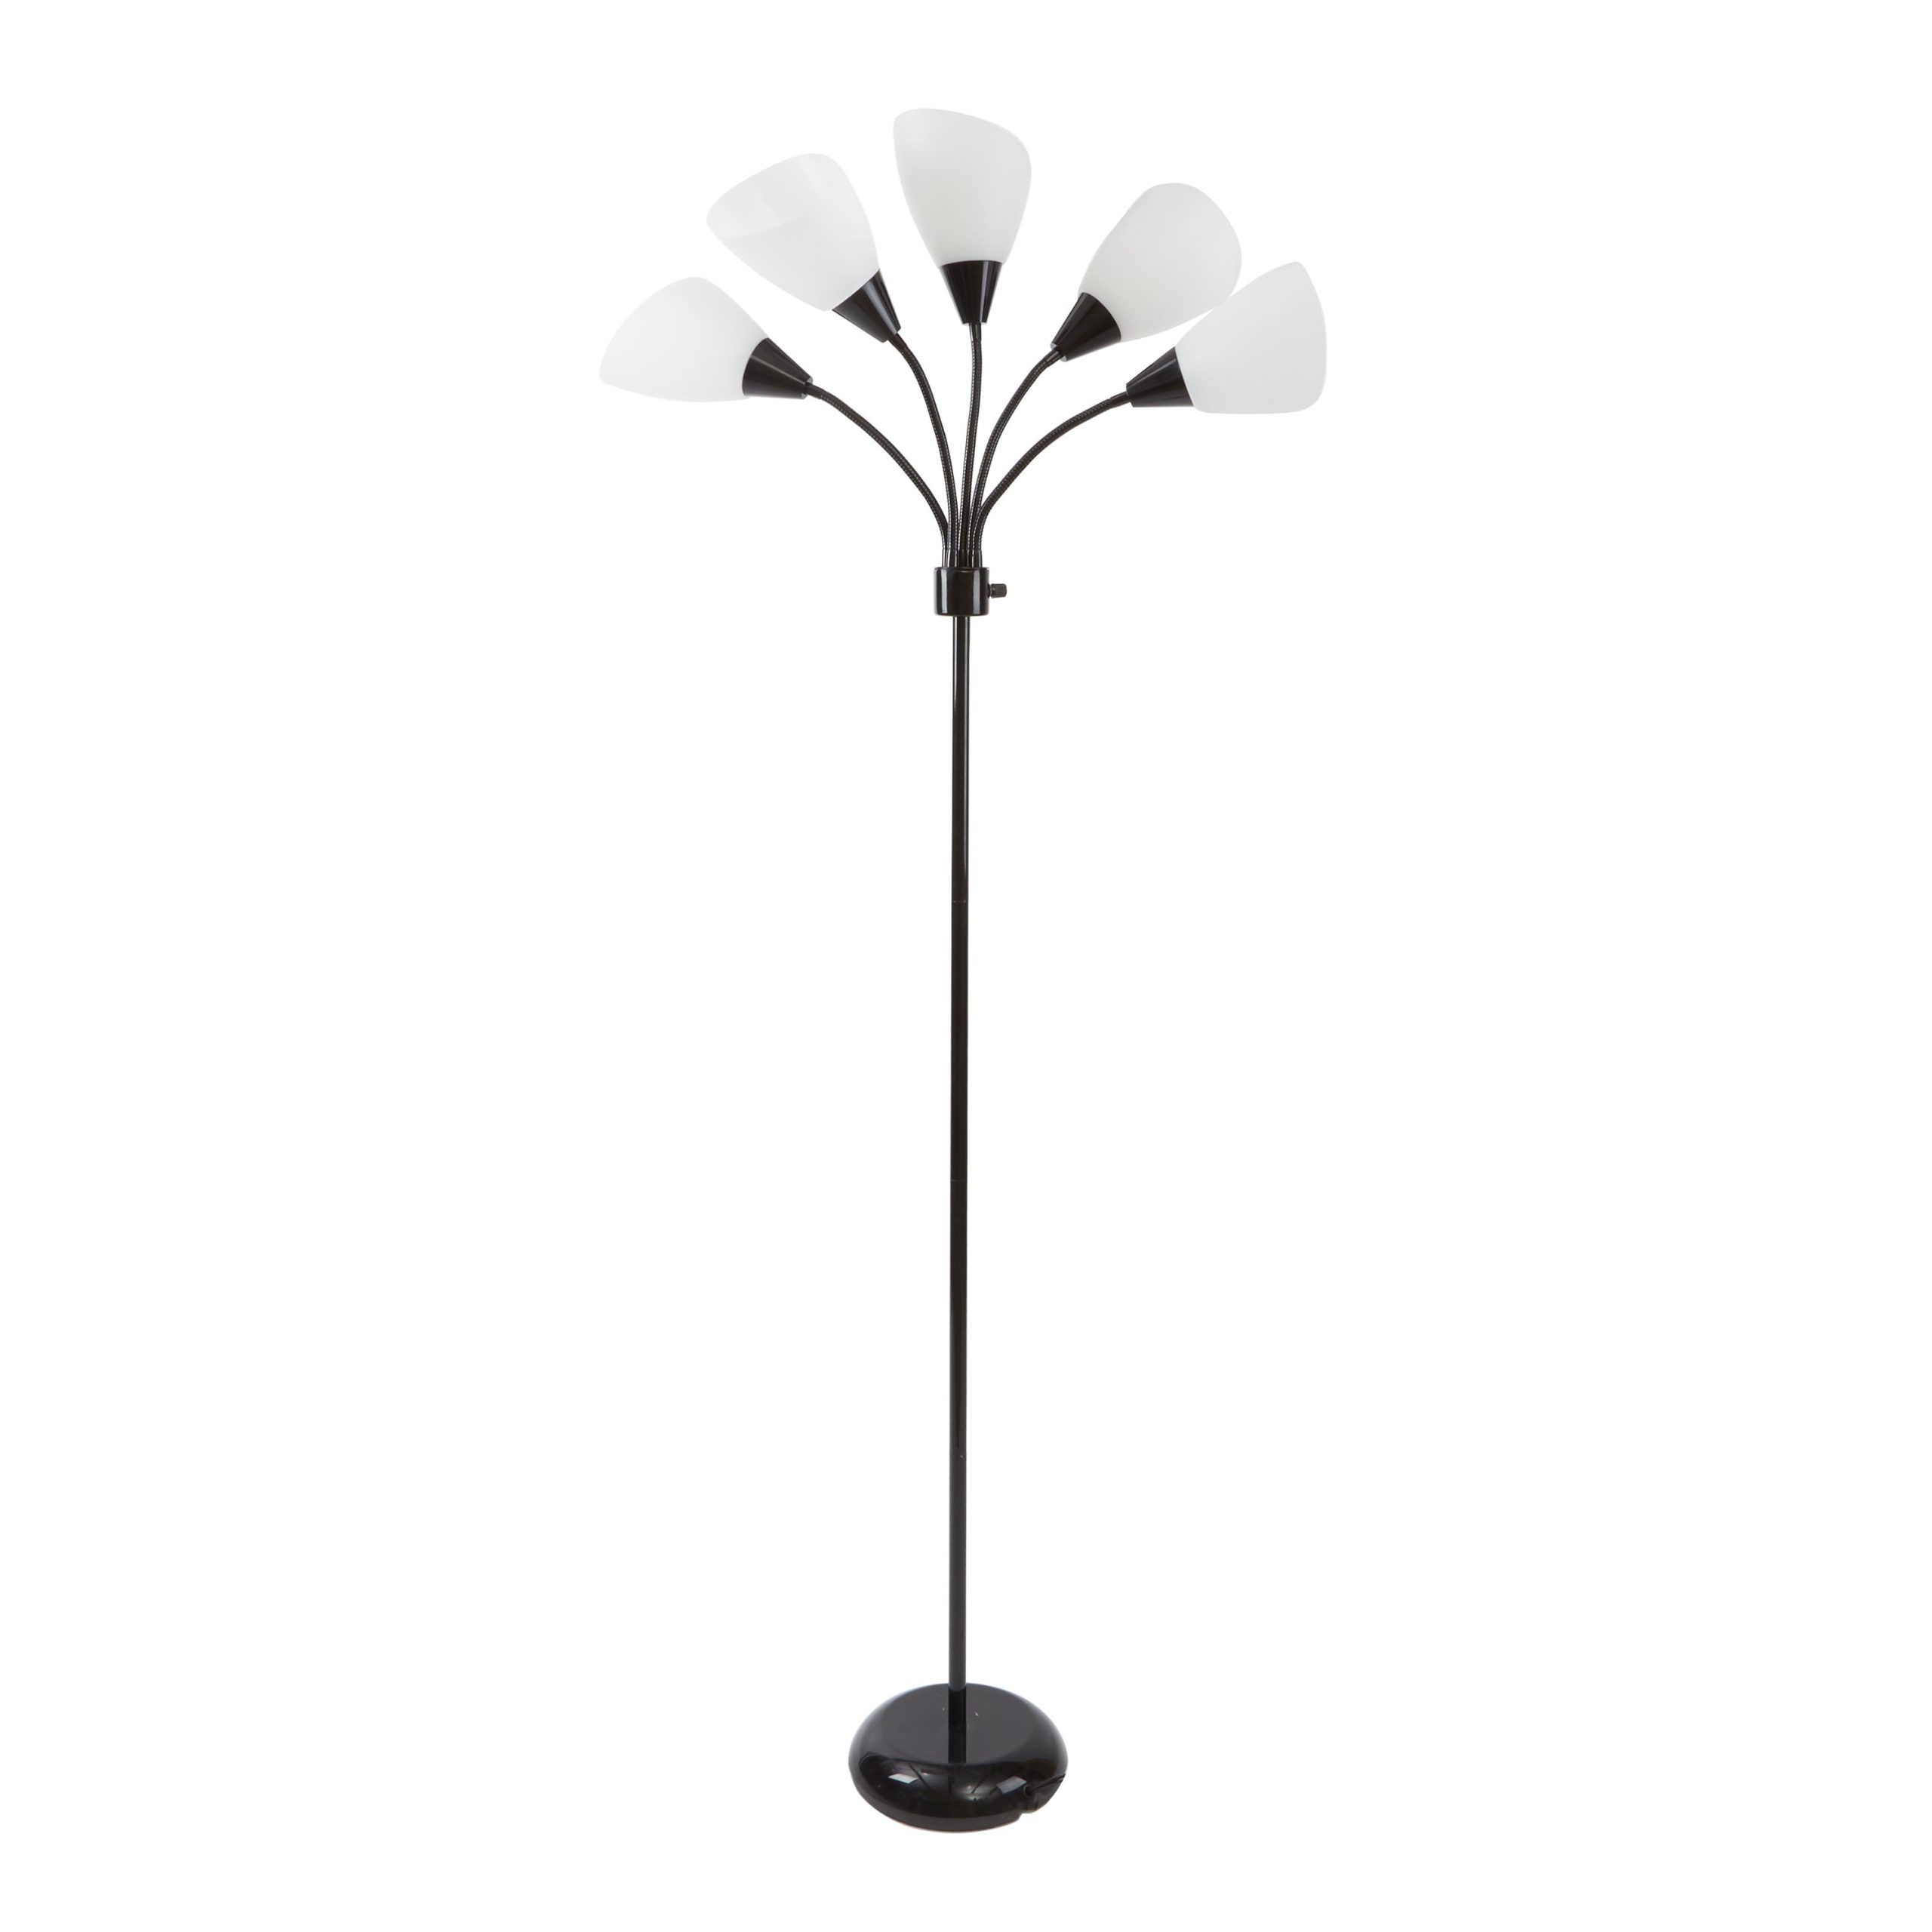 Mainstays 5 Light Metal Floor Lamp With White Shade, Black Finish –  Walmart Pertaining To 5 Light Floor Lamps (View 4 of 20)